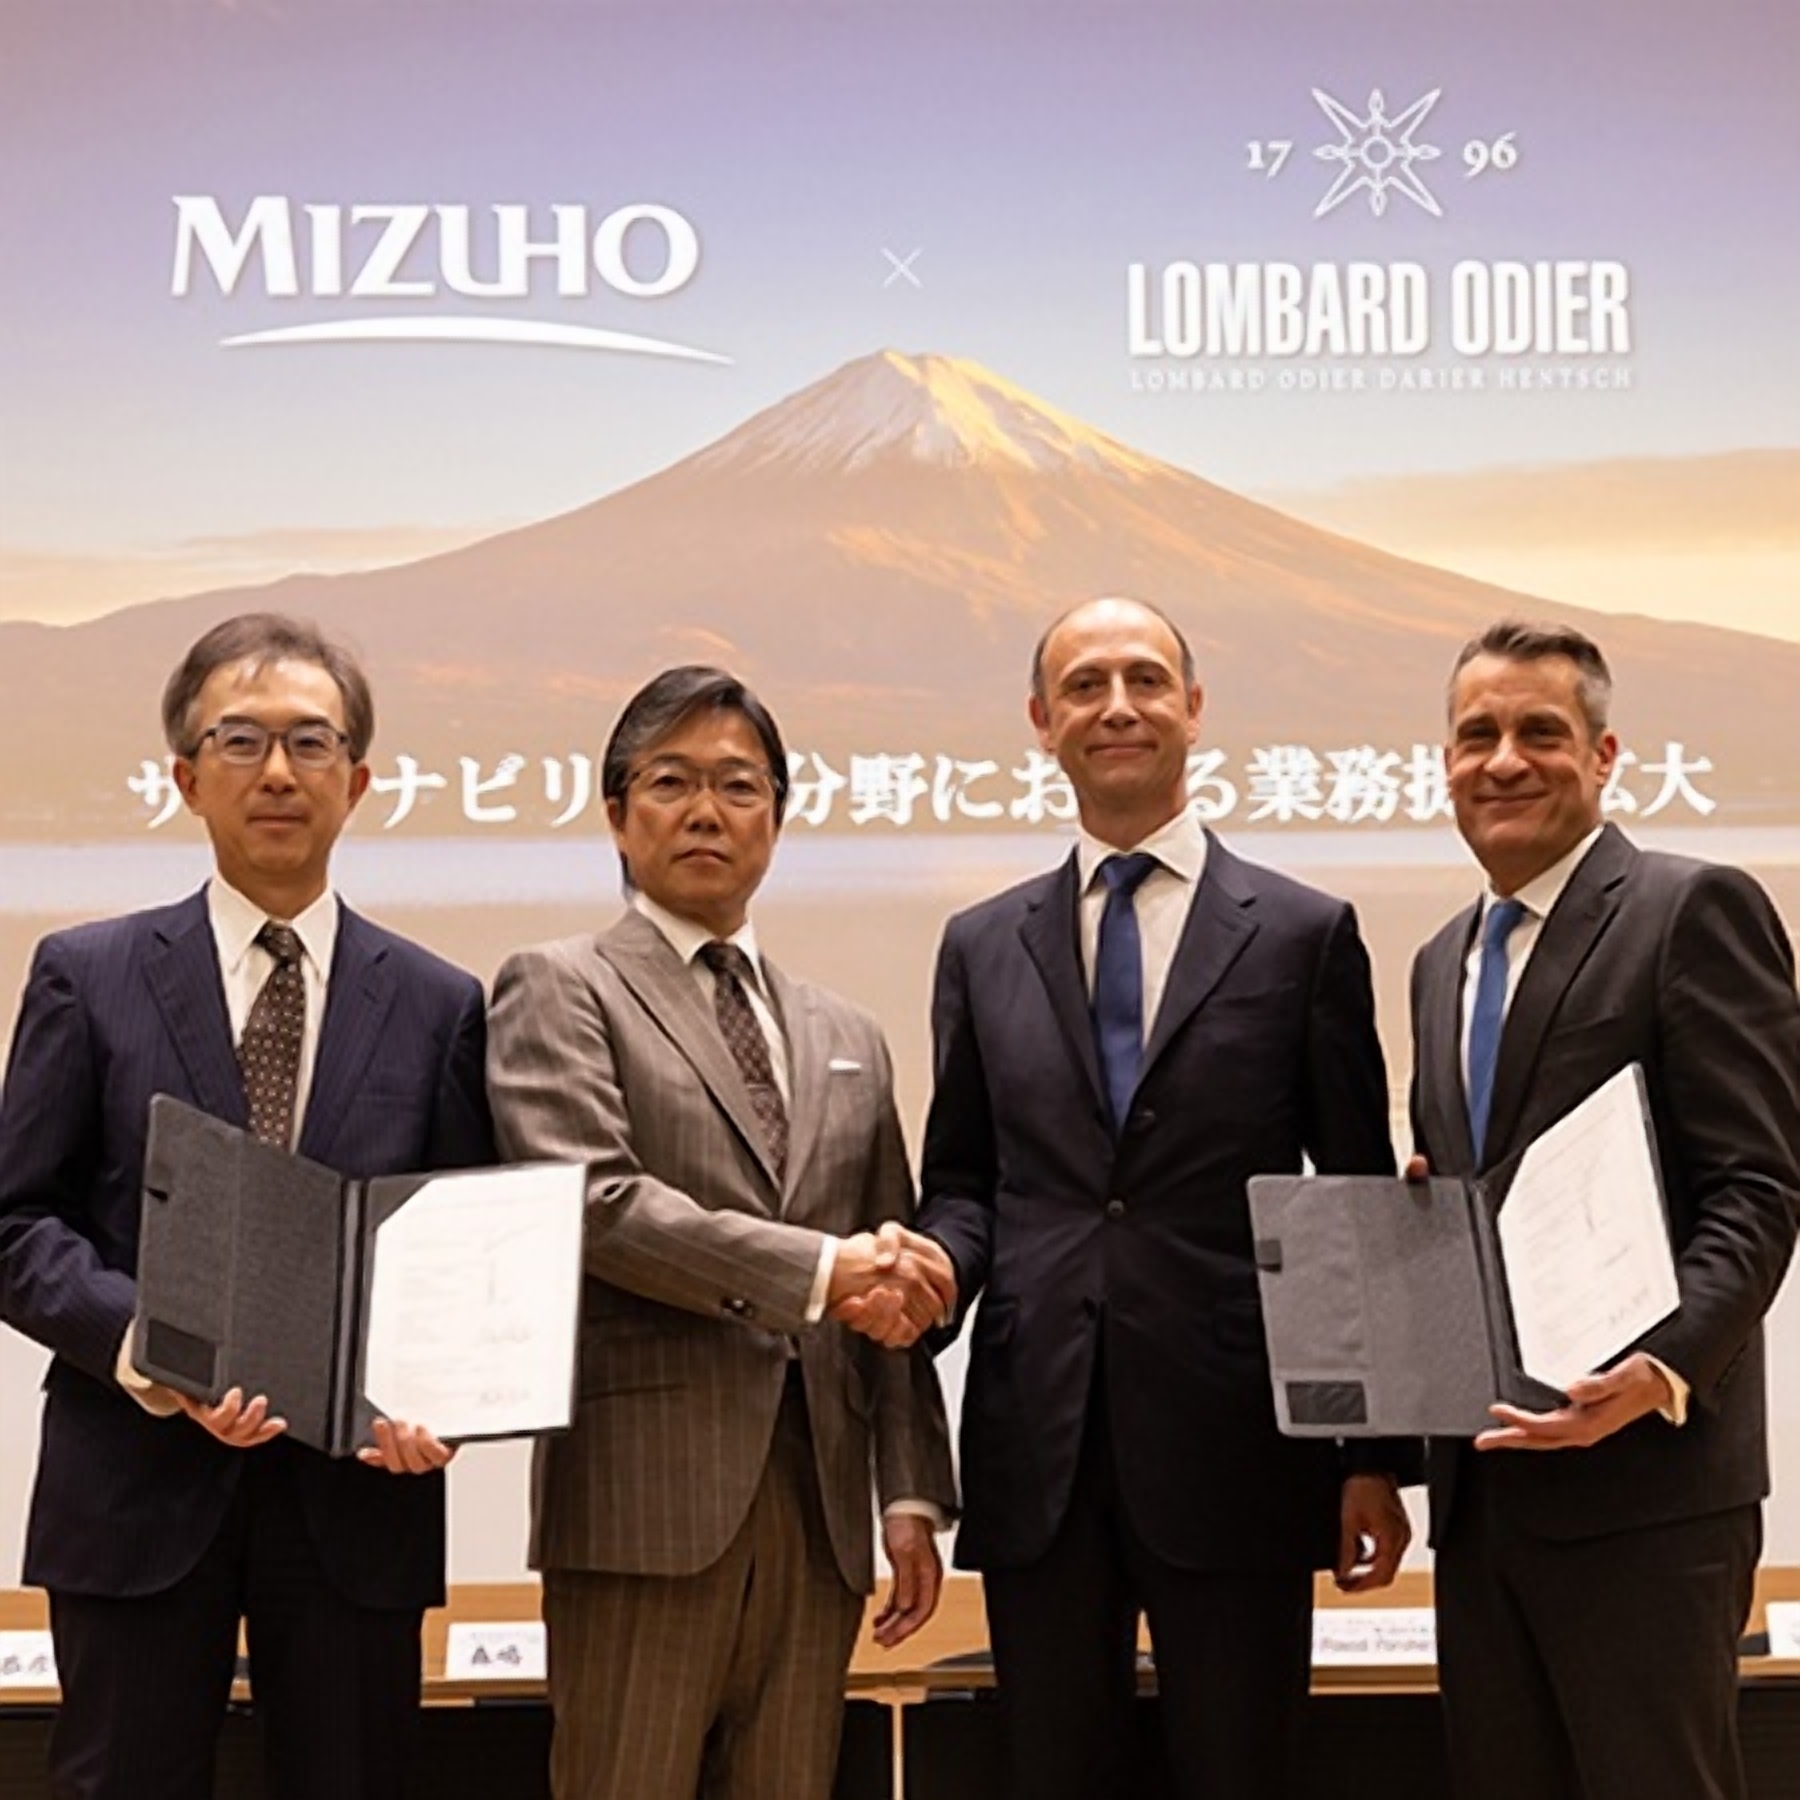 KnowESG_Mizuho, Lombard Odier Partner on Sustainable Finance